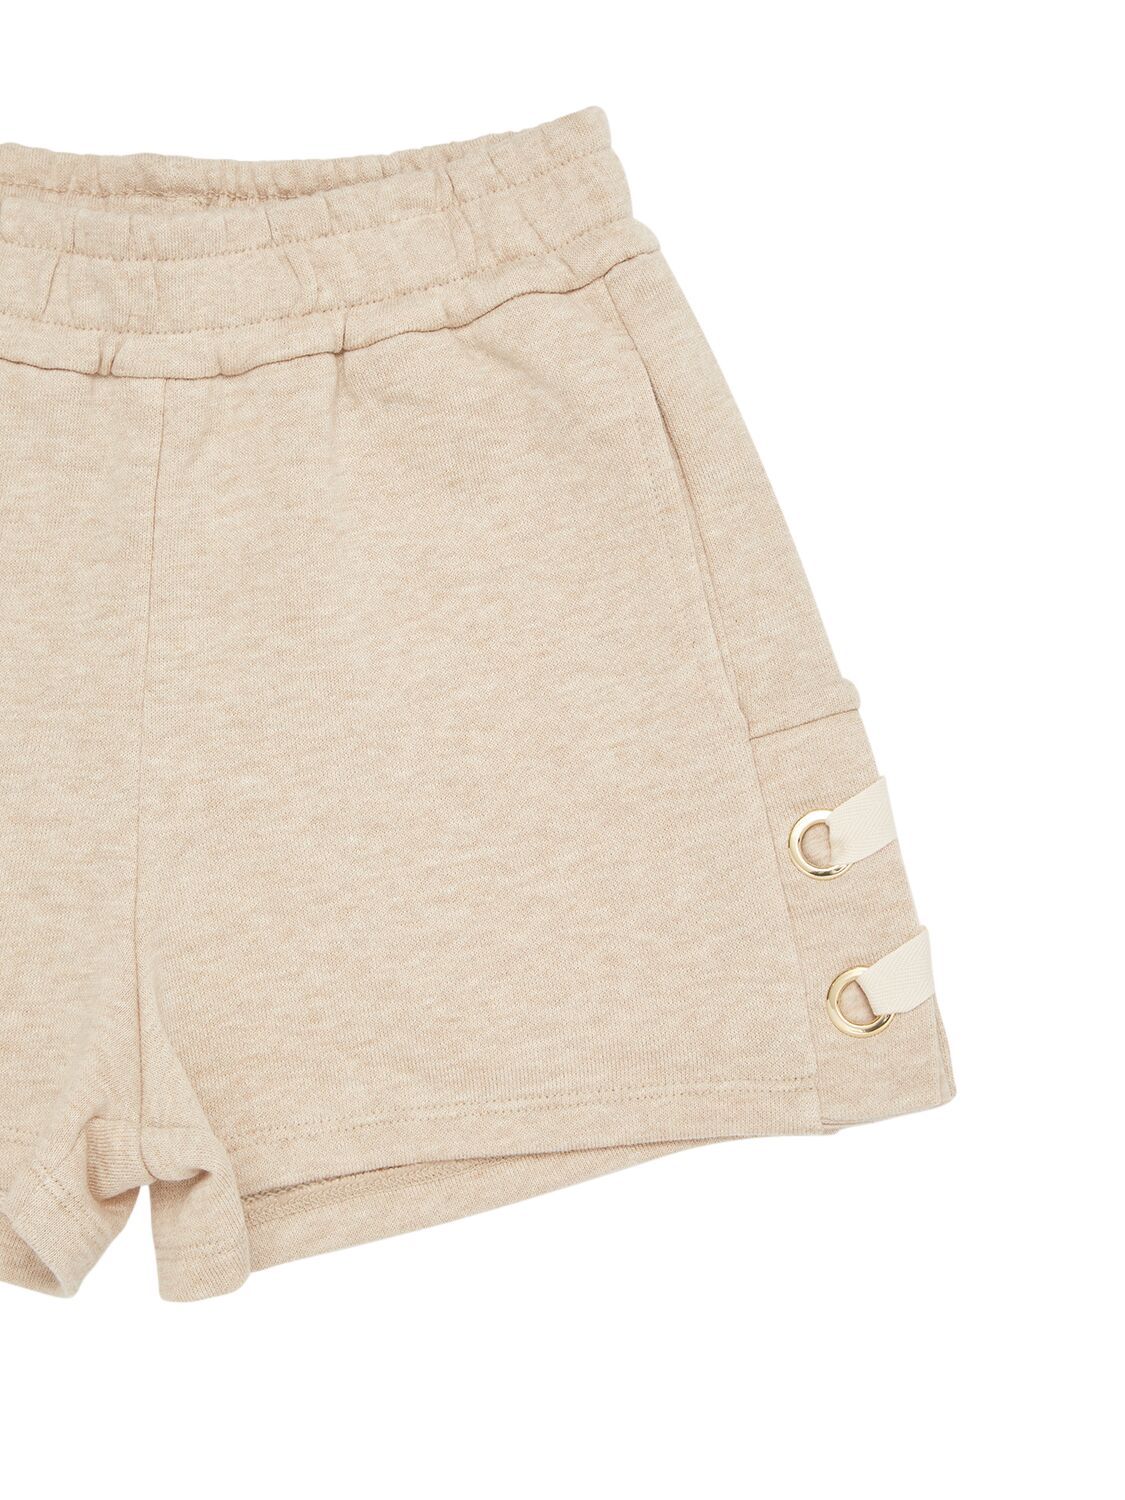 Shop Chloé French Terry Shorts In Beige